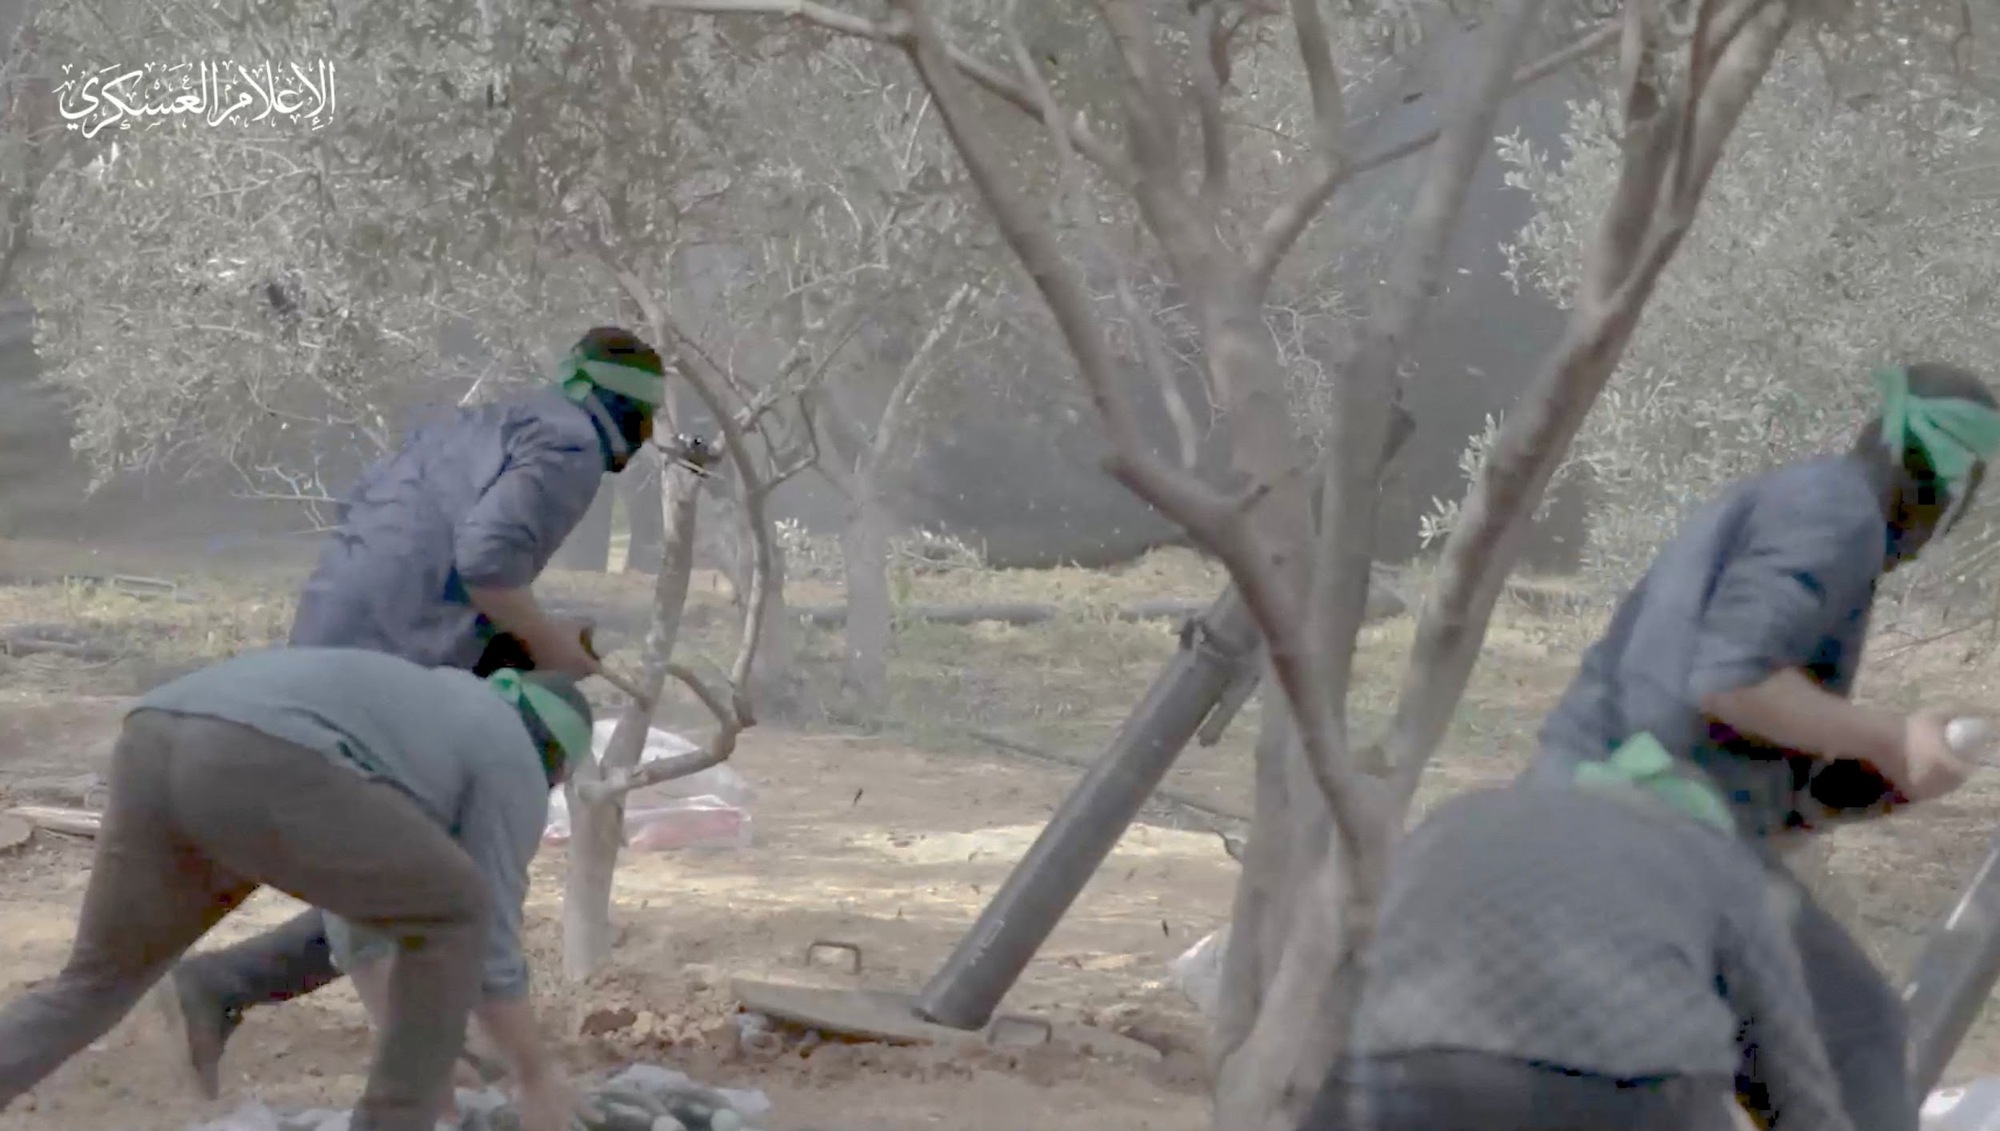 Hamas releases footages showing what it says are its fighters firing mortar shells at Israeli forces